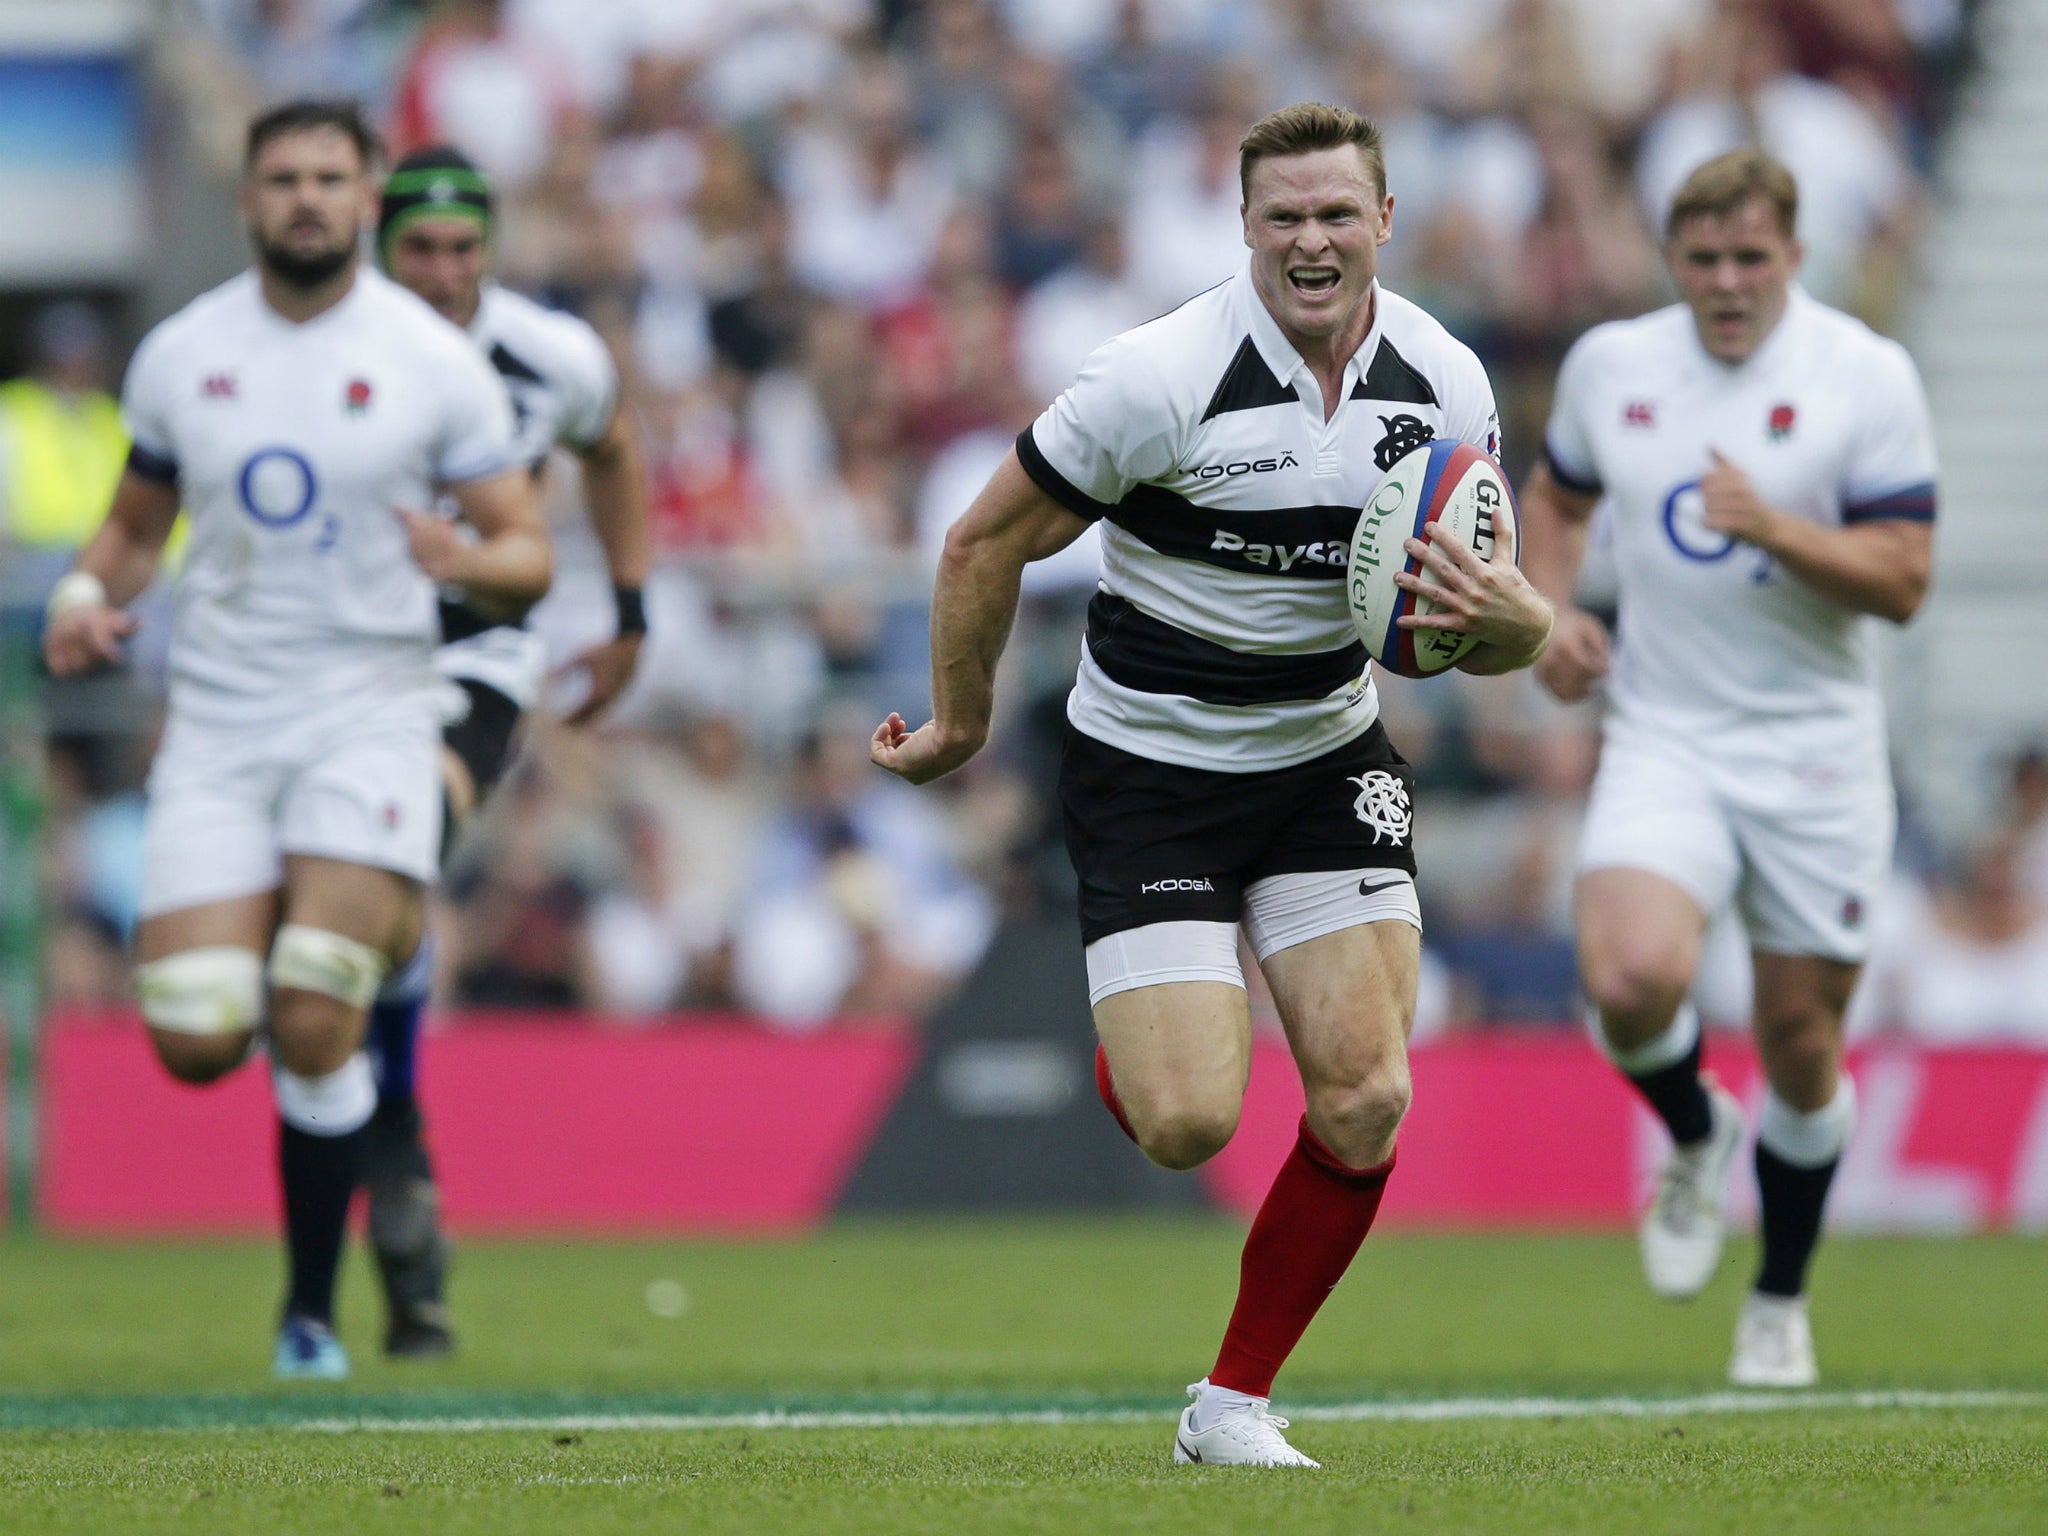 Chris Ashton scored three tries as England suffered a record defeat by the Barbarians